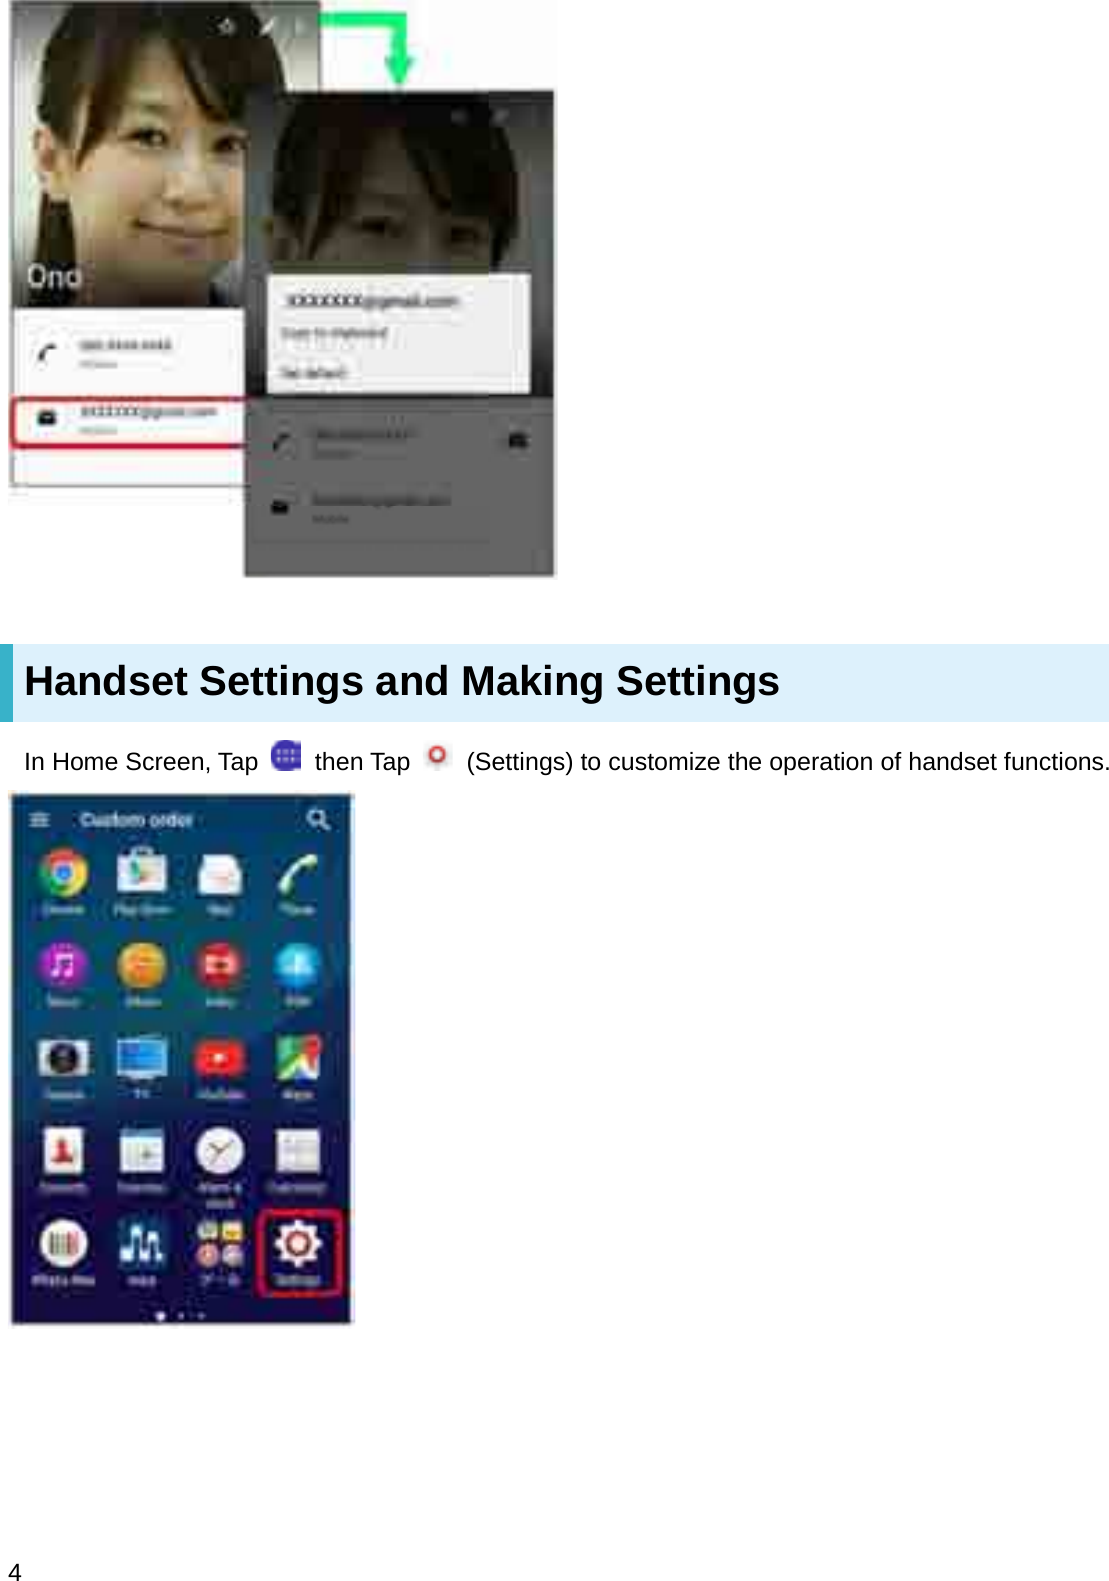 Handset Settings and Making SettingsIn Home Screen, Tap  then Tap  (Settings) to customize the operation of handset functions.4